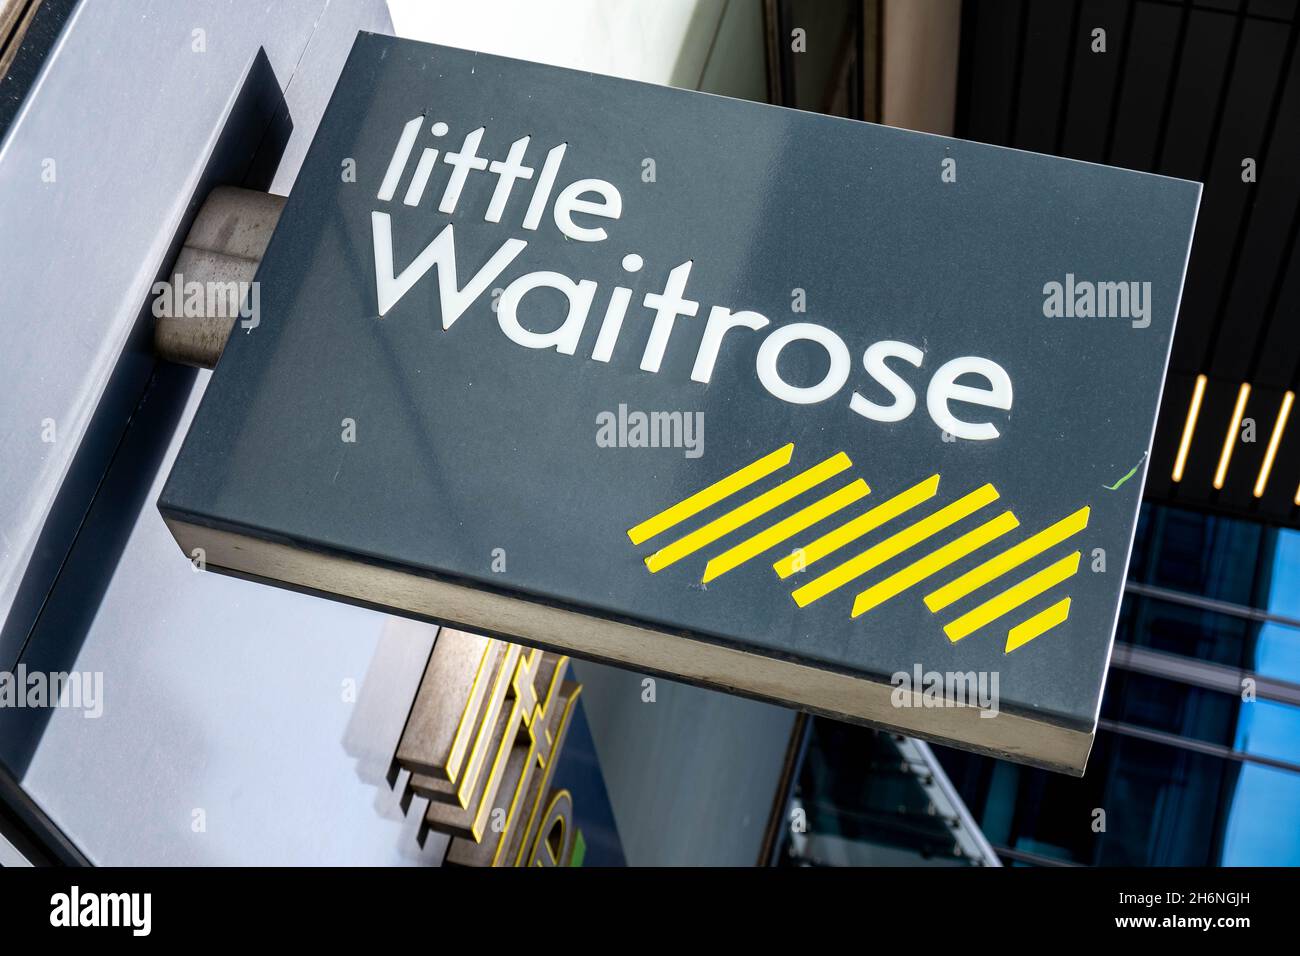 Victoria Westminster London England UK, November 7 2021, Little Waitrose Supermarket Sign Outside Shop In Victoria Street London Looking Up With No Pe Stock Photo